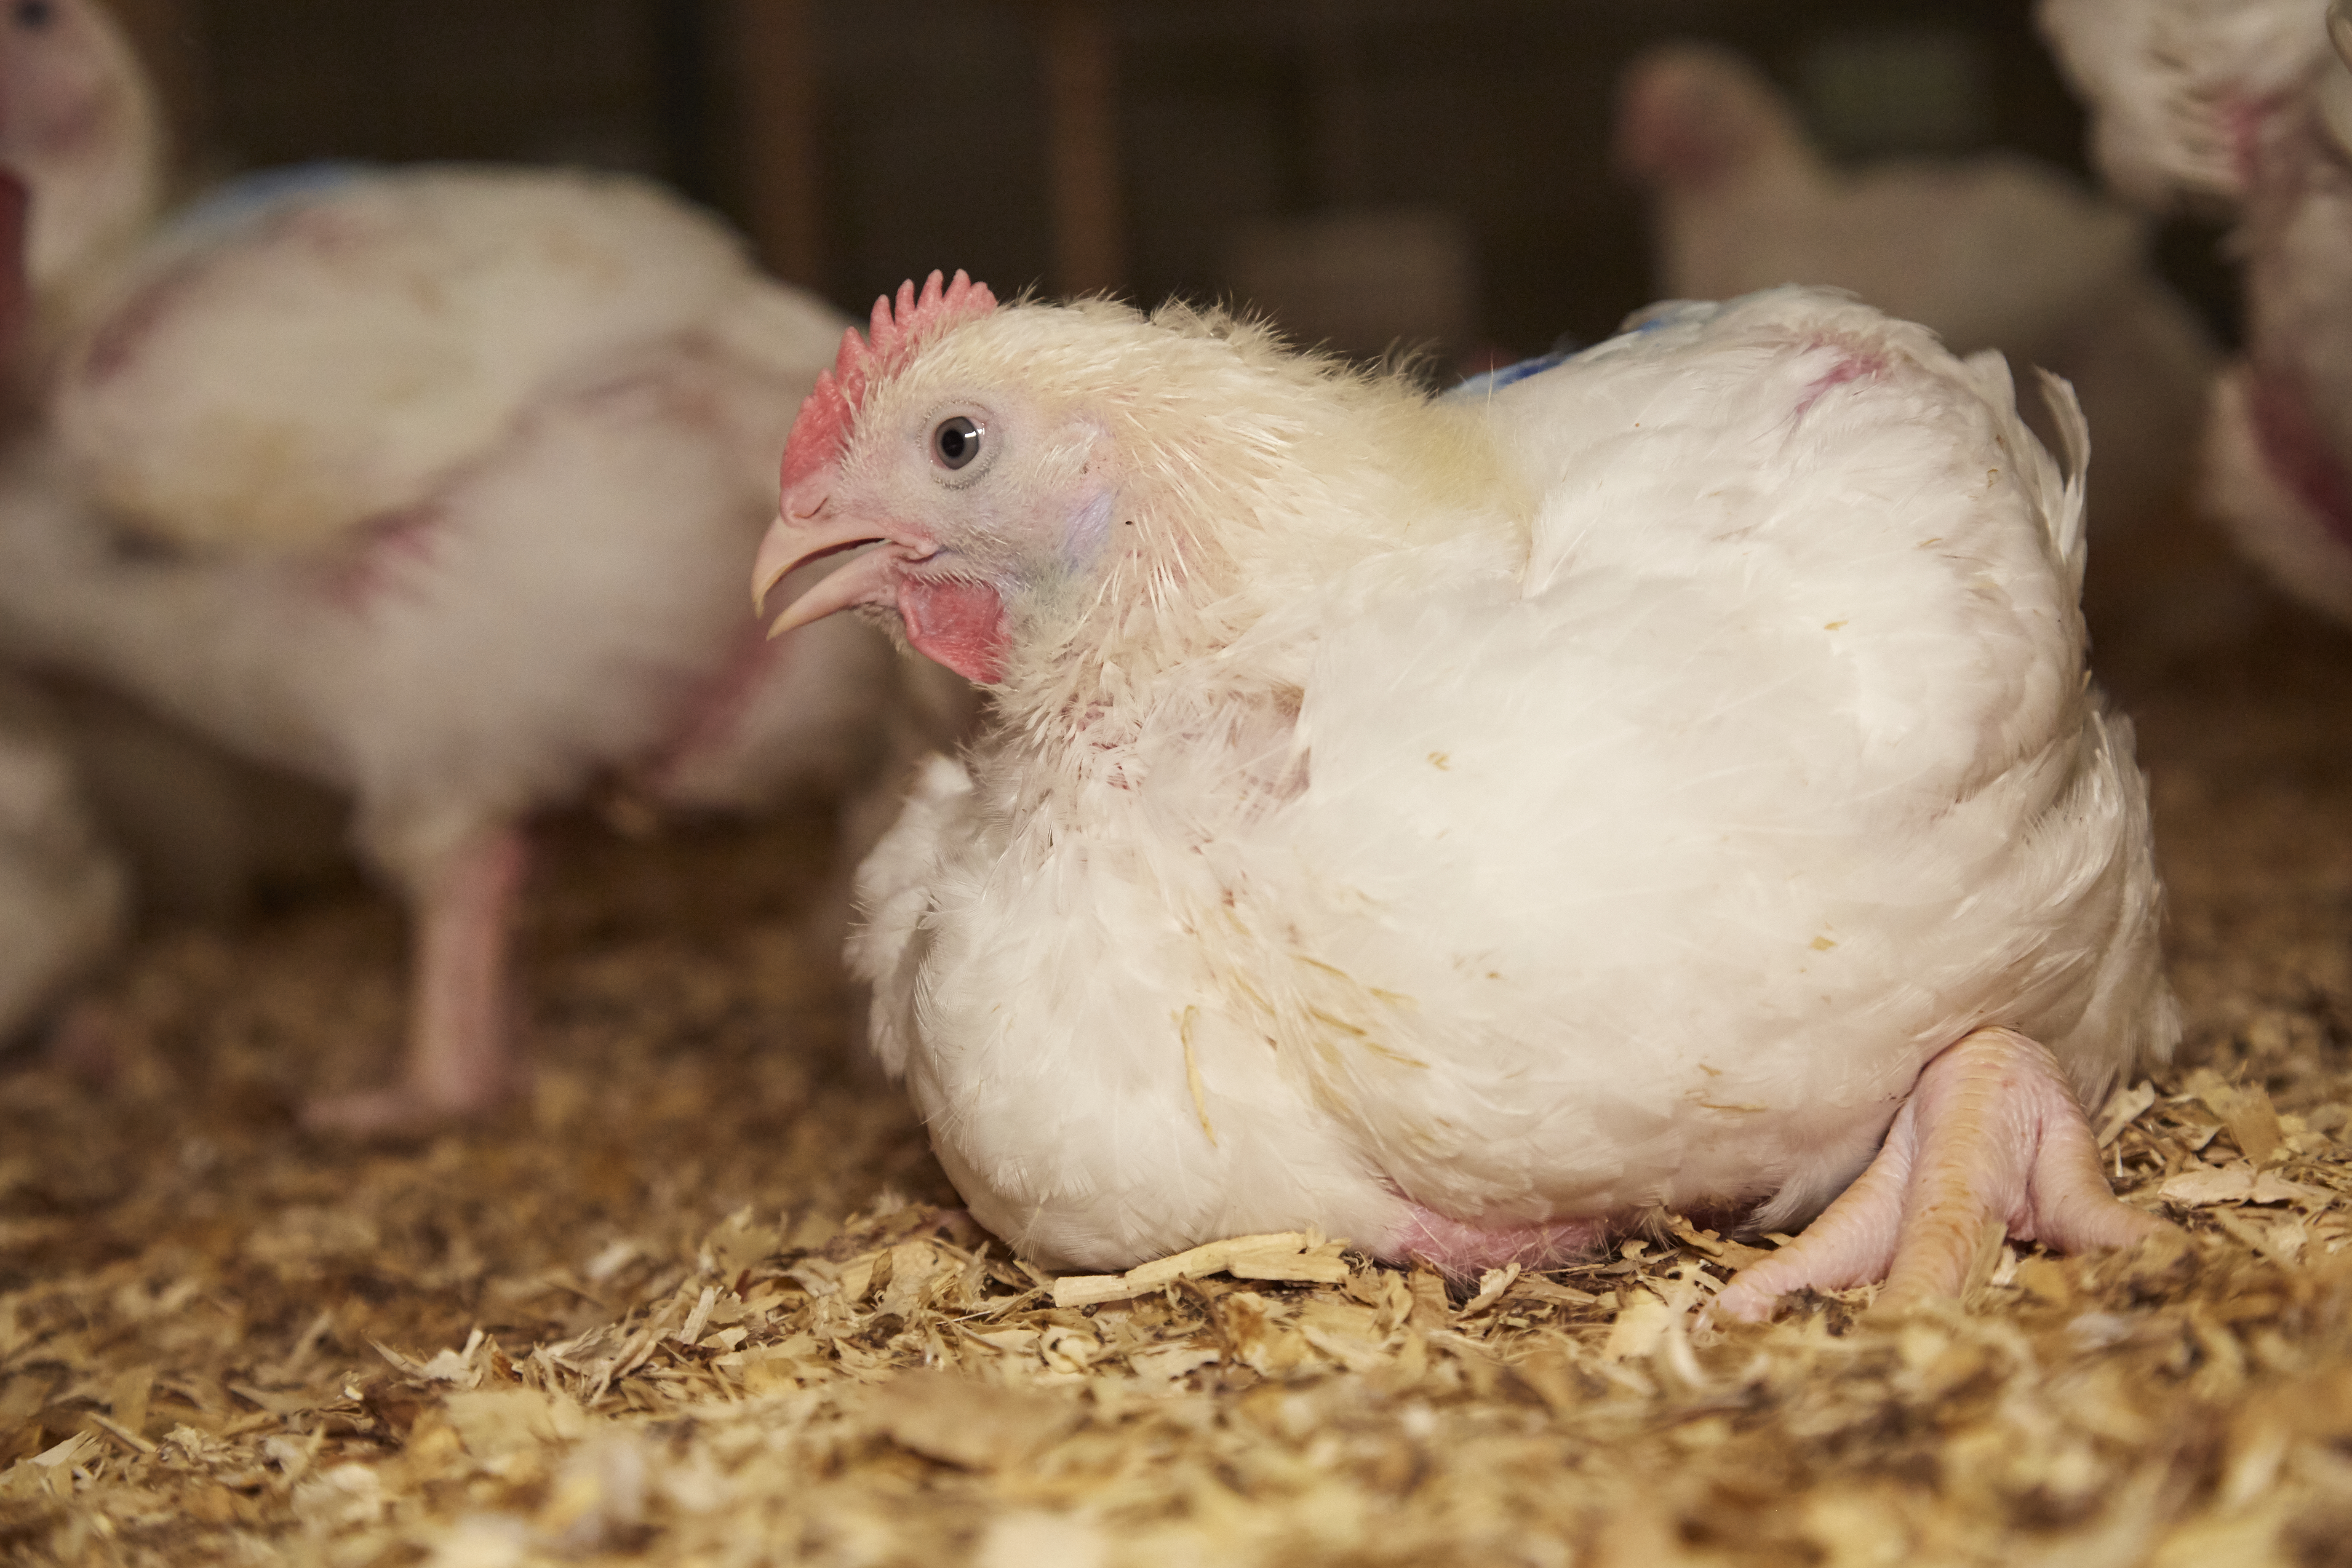 Modern broiler chickens reach harvest weight at 36-38 days; quick growth can lead to heart defects and leg weakness